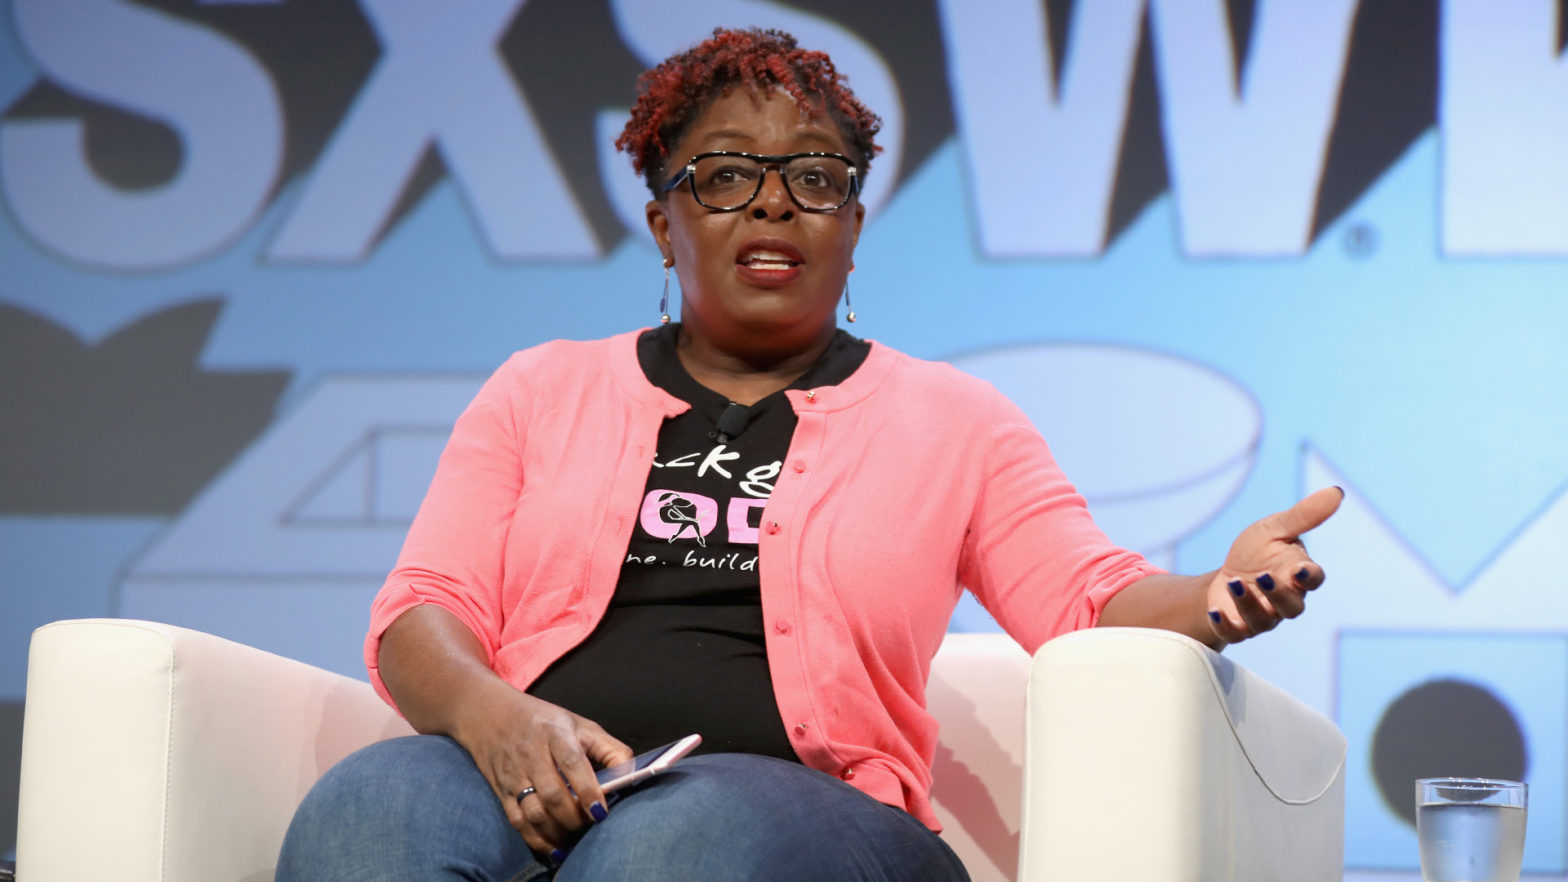 Kimberly Bryant Speaks On Her Removal From Black Girls Code: 'Ten+ Years Of Founding And Building An Organization To A $40M+ International Brand'